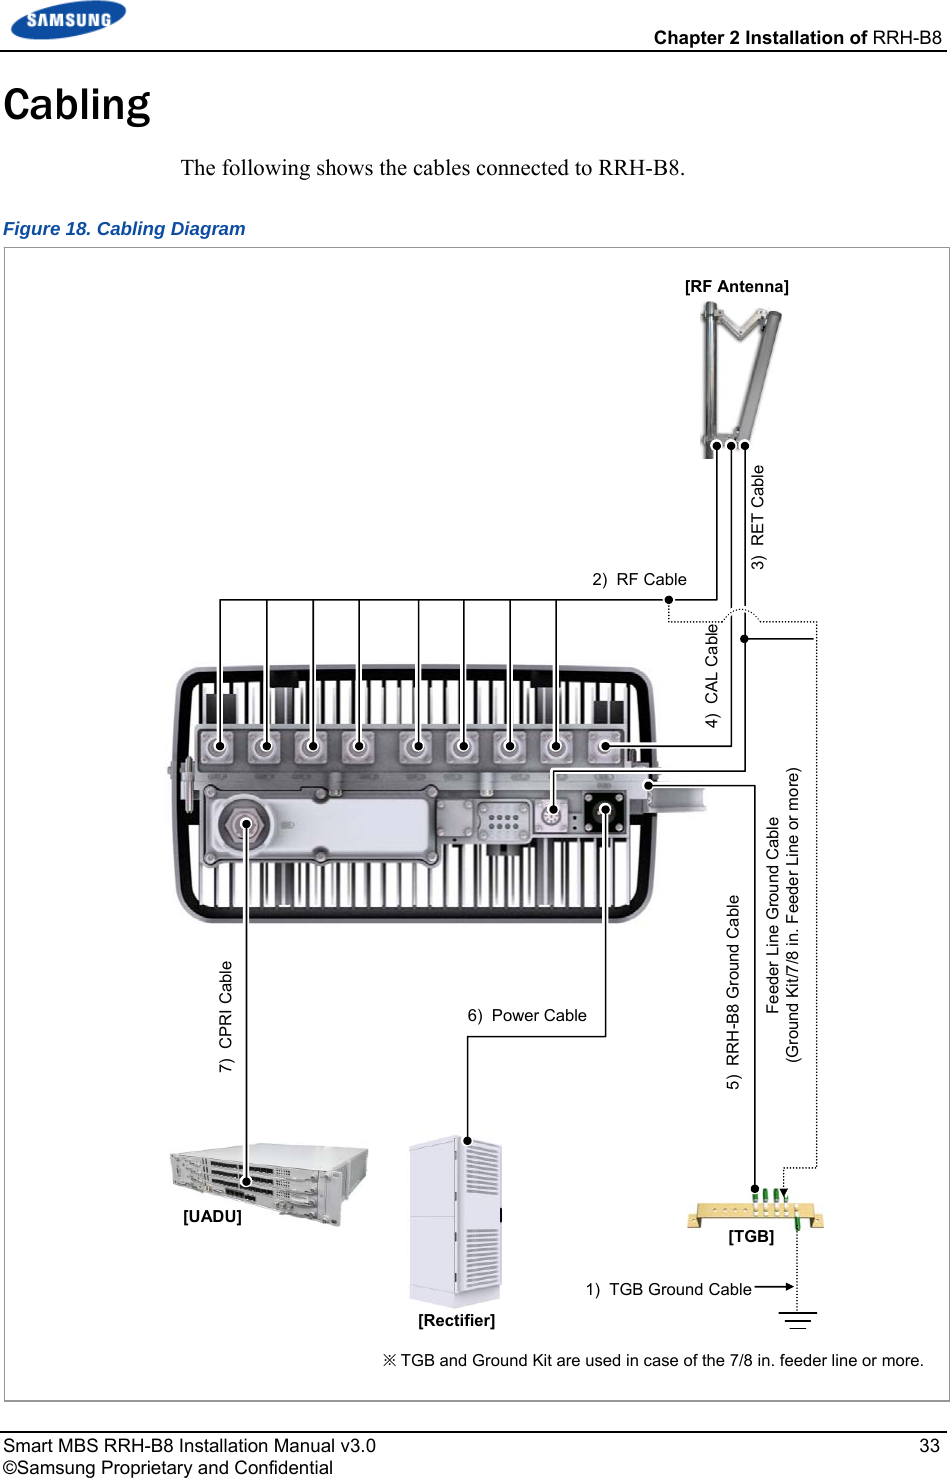  Chapter 2 Installation of RRH-B8 Smart MBS RRH-B8 Installation Manual v3.0   33 ©Samsung Proprietary and Confidential Cabling The following shows the cables connected to RRH-B8. Figure 18. Cabling Diagram  [RF Antenna] 1)  TGB Ground Cable[TGB] Feeder Line Ground Cable (Ground Kit/7/8 in. Feeder Line or more) ※ TGB and Ground Kit are used in case of the 7/8 in. feeder line or more.[Rectifier] [UADU] 7)  CPRI Cable 2)  RF Cable 3)  RET Cable 6)  Power Cable 5)  RRH-B8 Ground Cable 4)  CAL Cable 